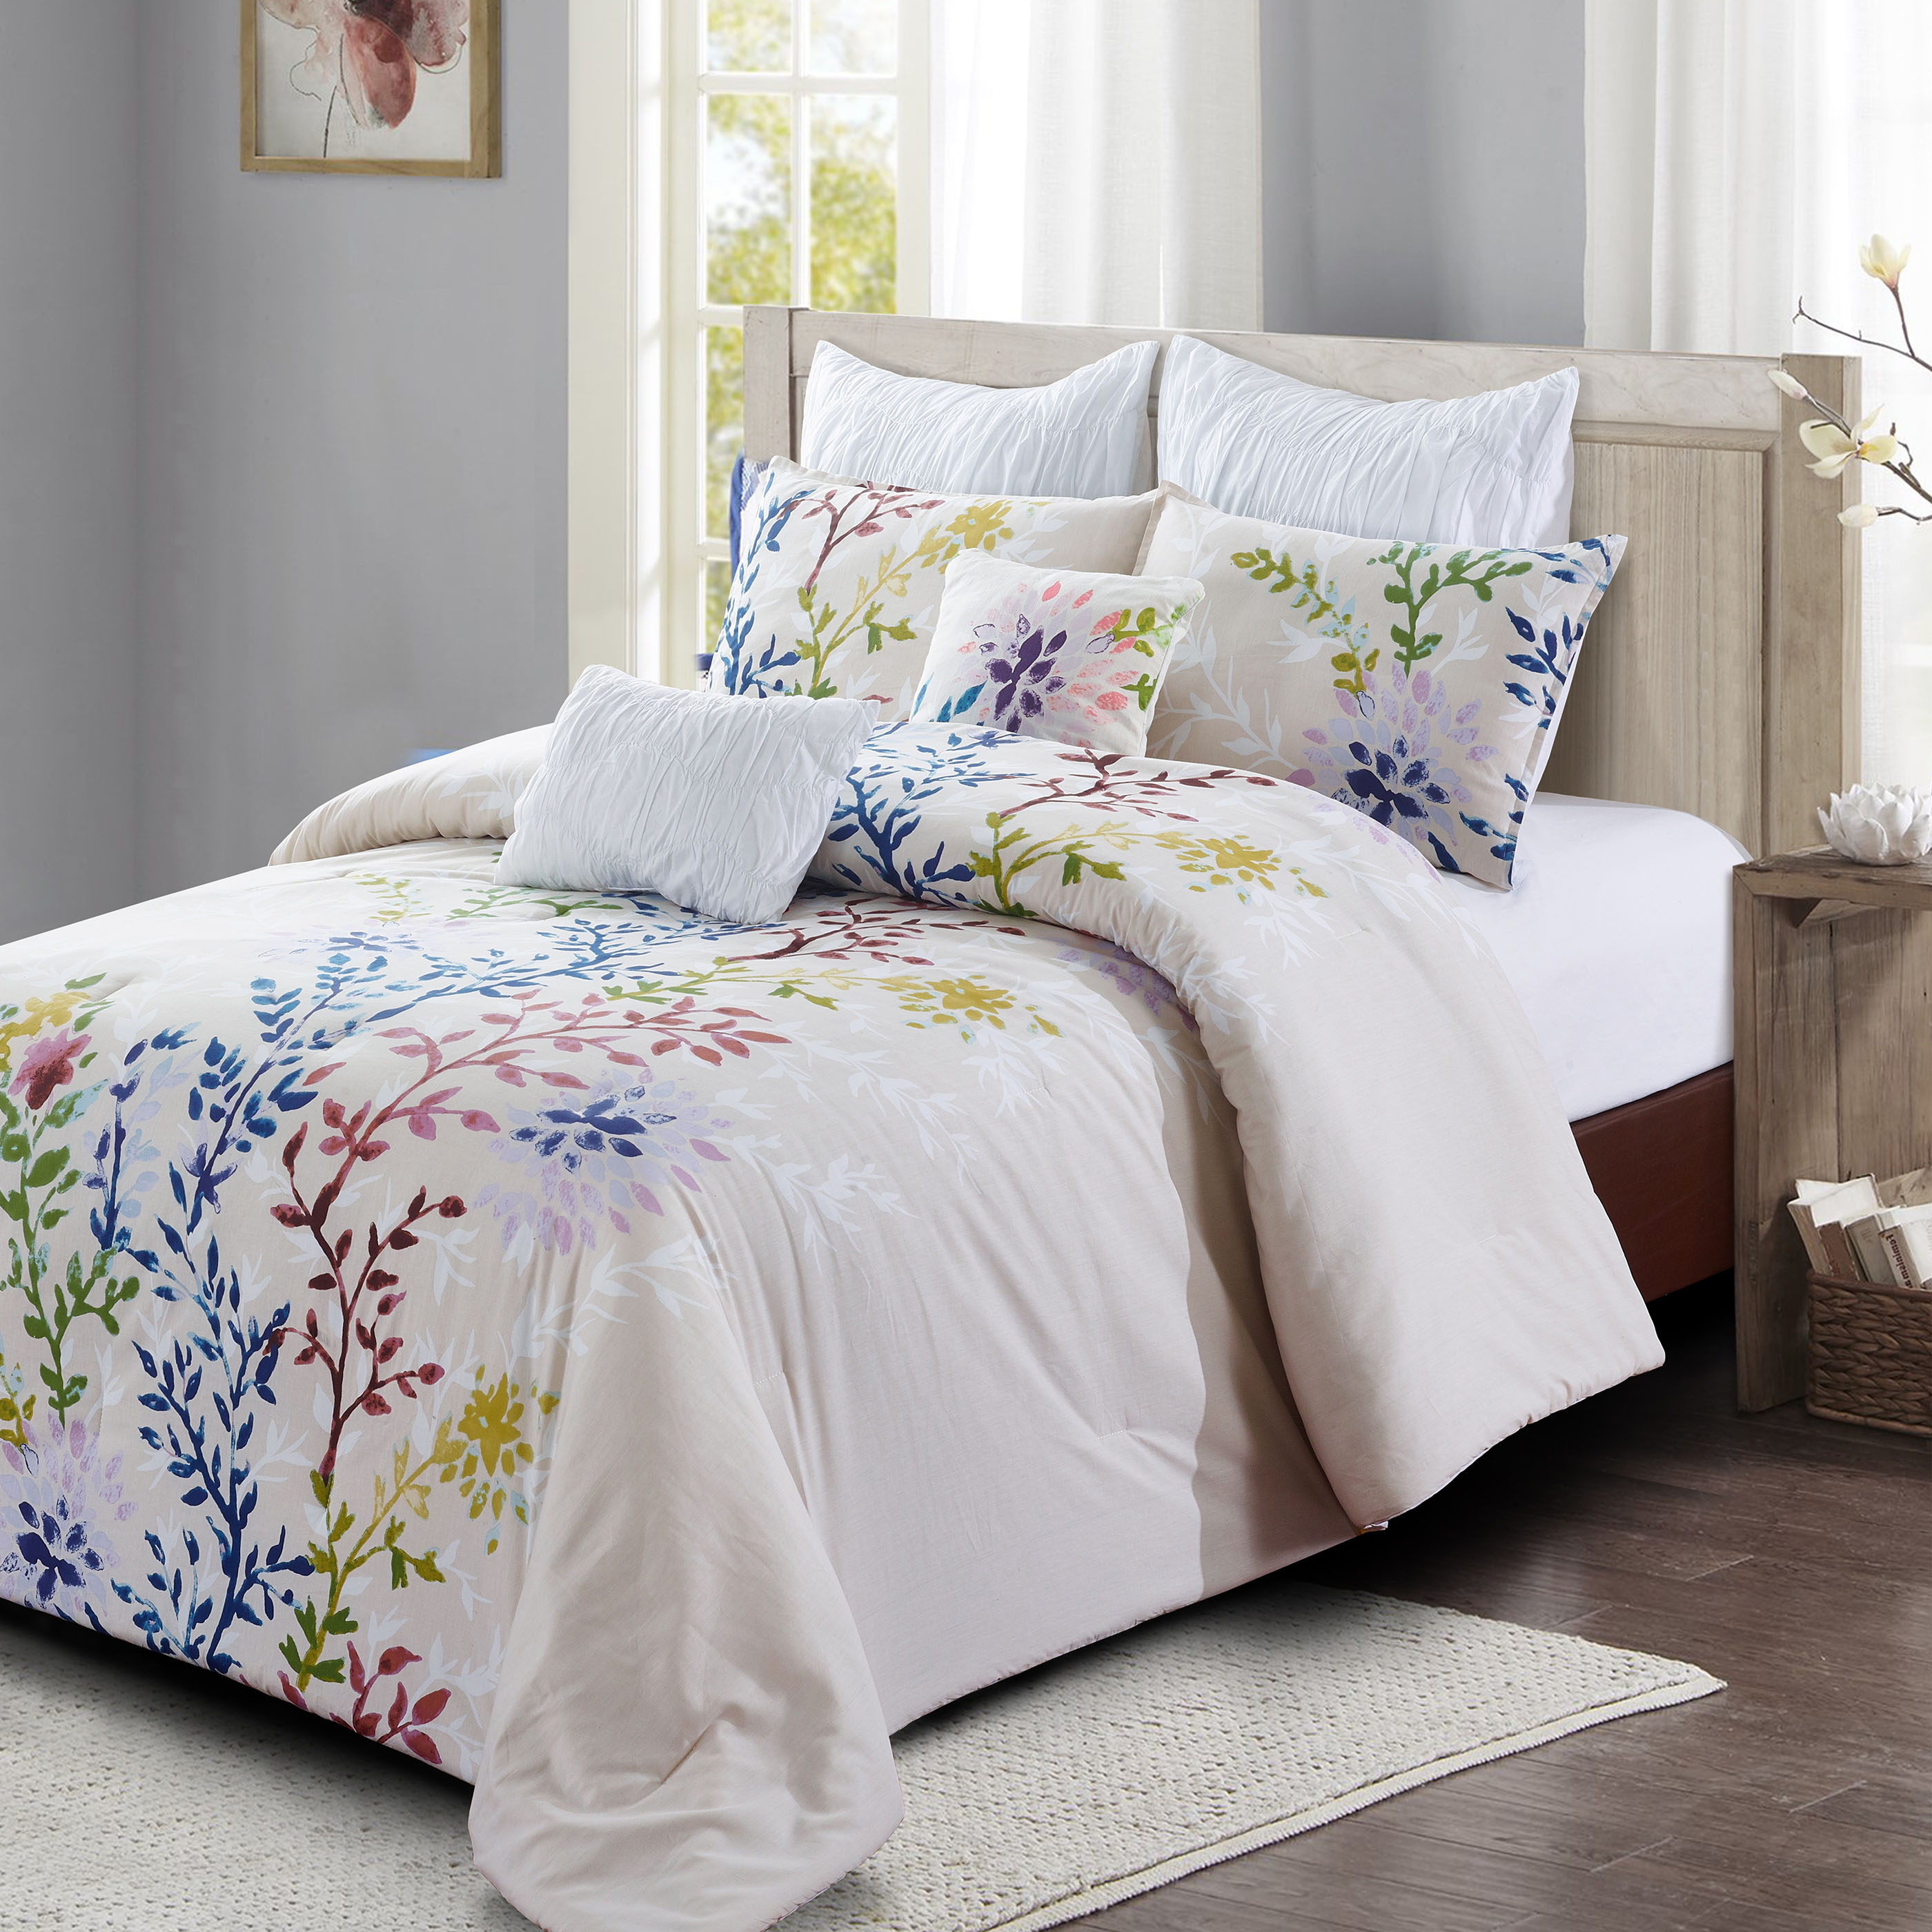 Hotel Collection Classic Rose Blush Floral King Comforter 2 Euro Shams for sale online 